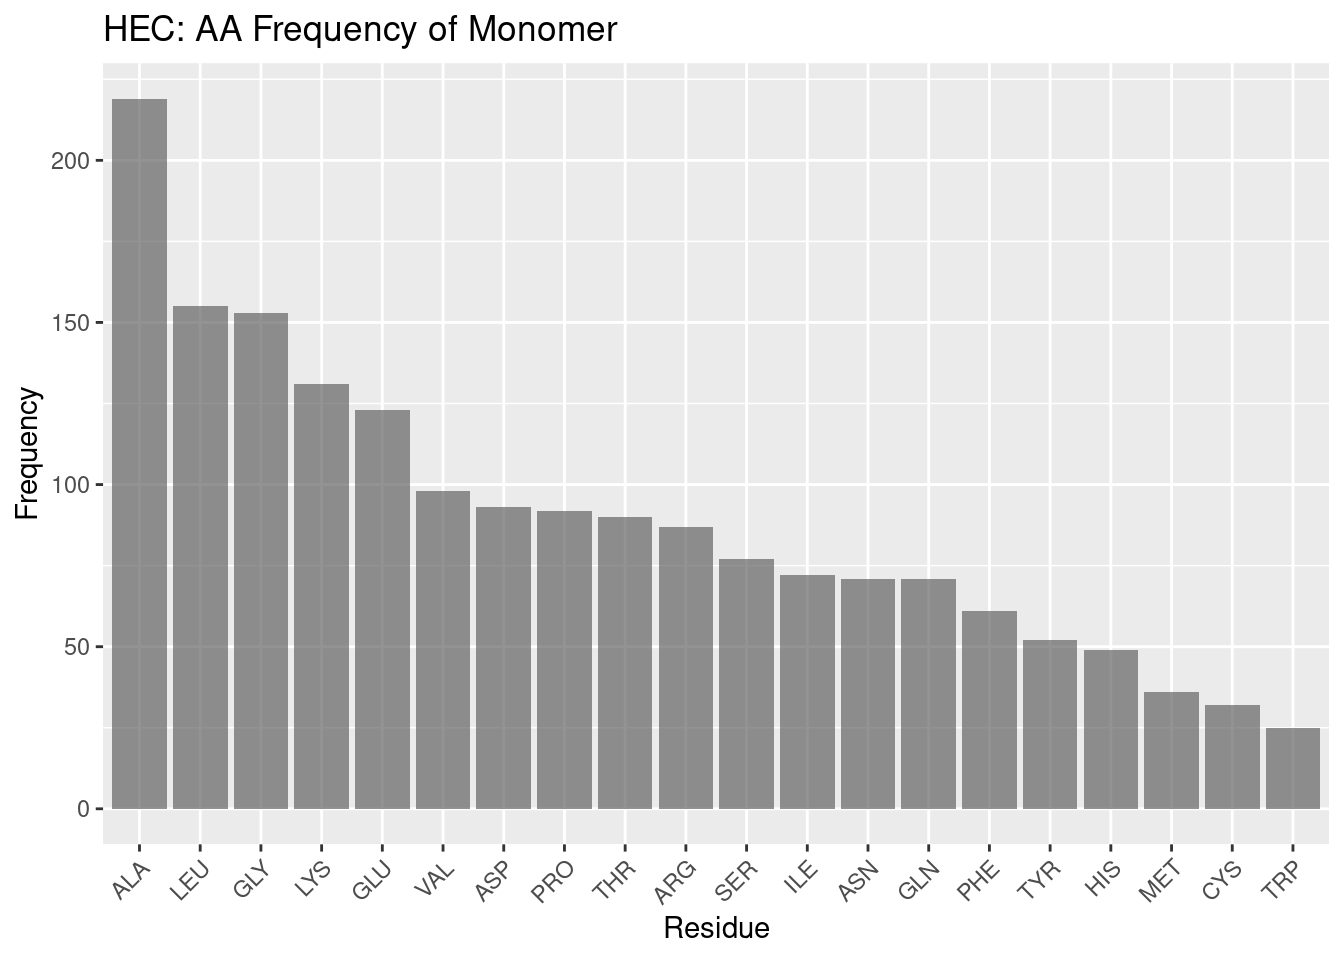 HEC: AA Frequency of Monomer